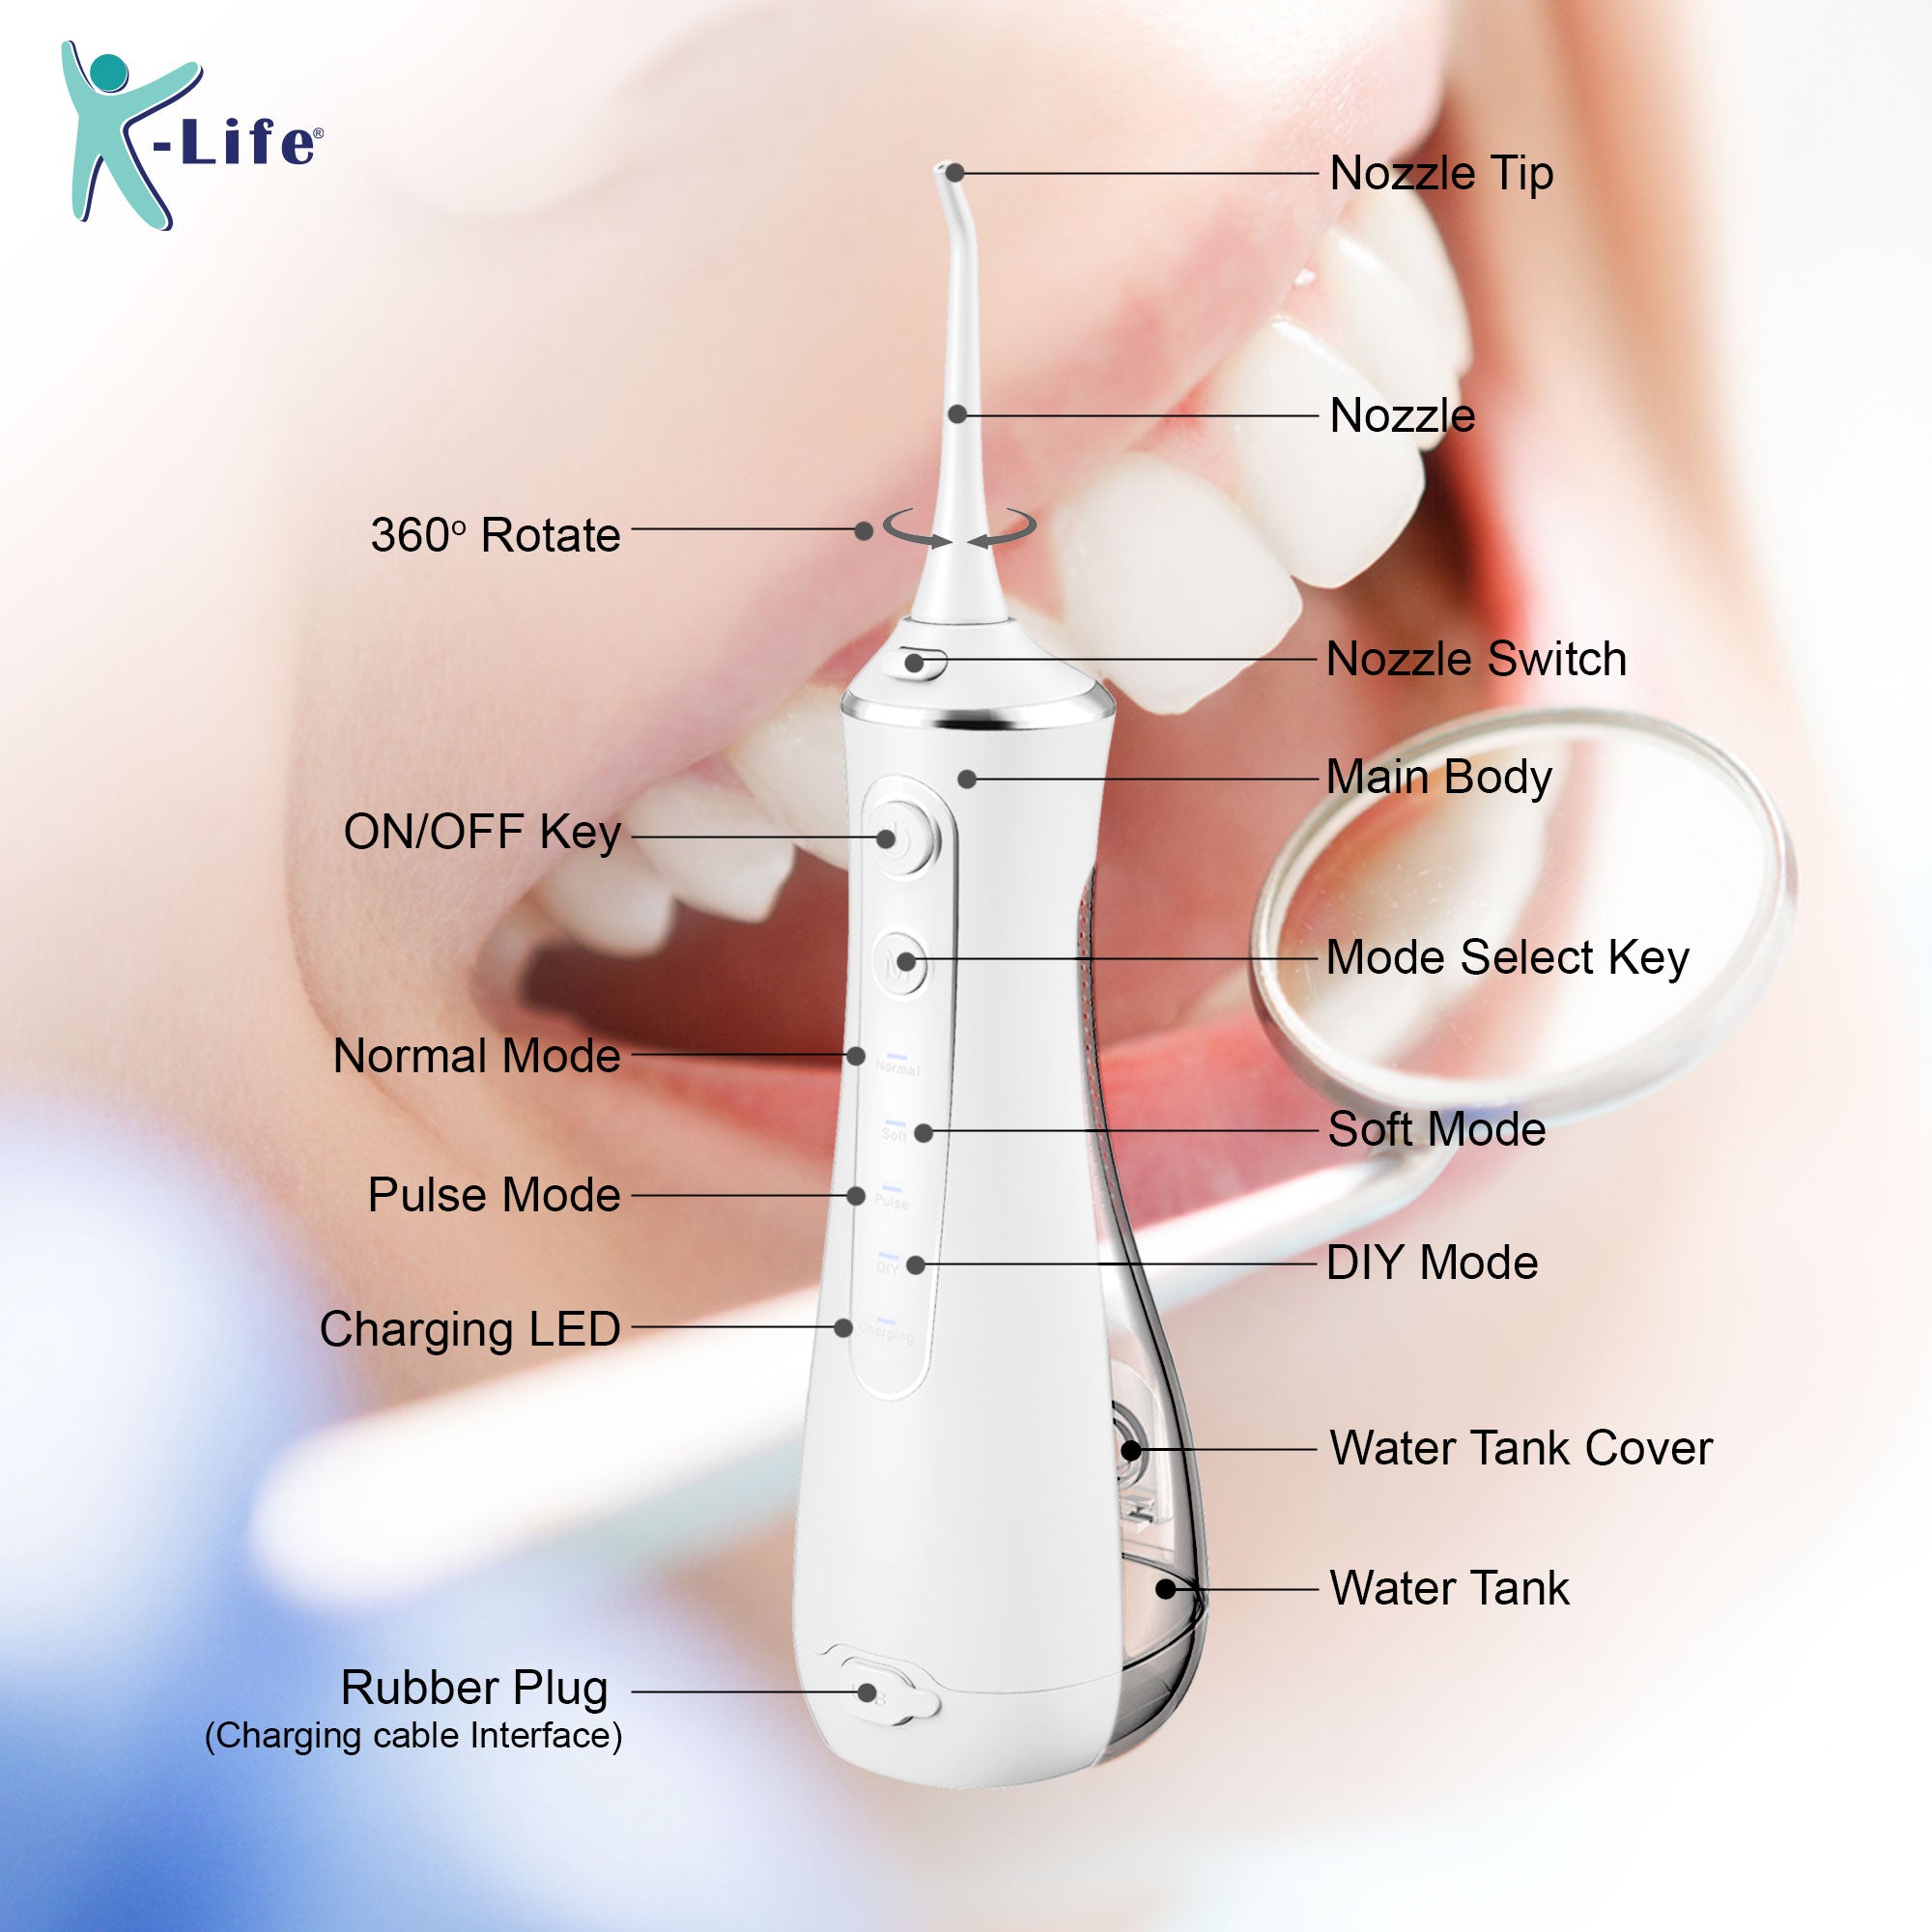 K-life OI-101 Portable Oral Irrigator Teeth Kit Cleaning Dental Care Tooth Pick Cleaner Water Flosser